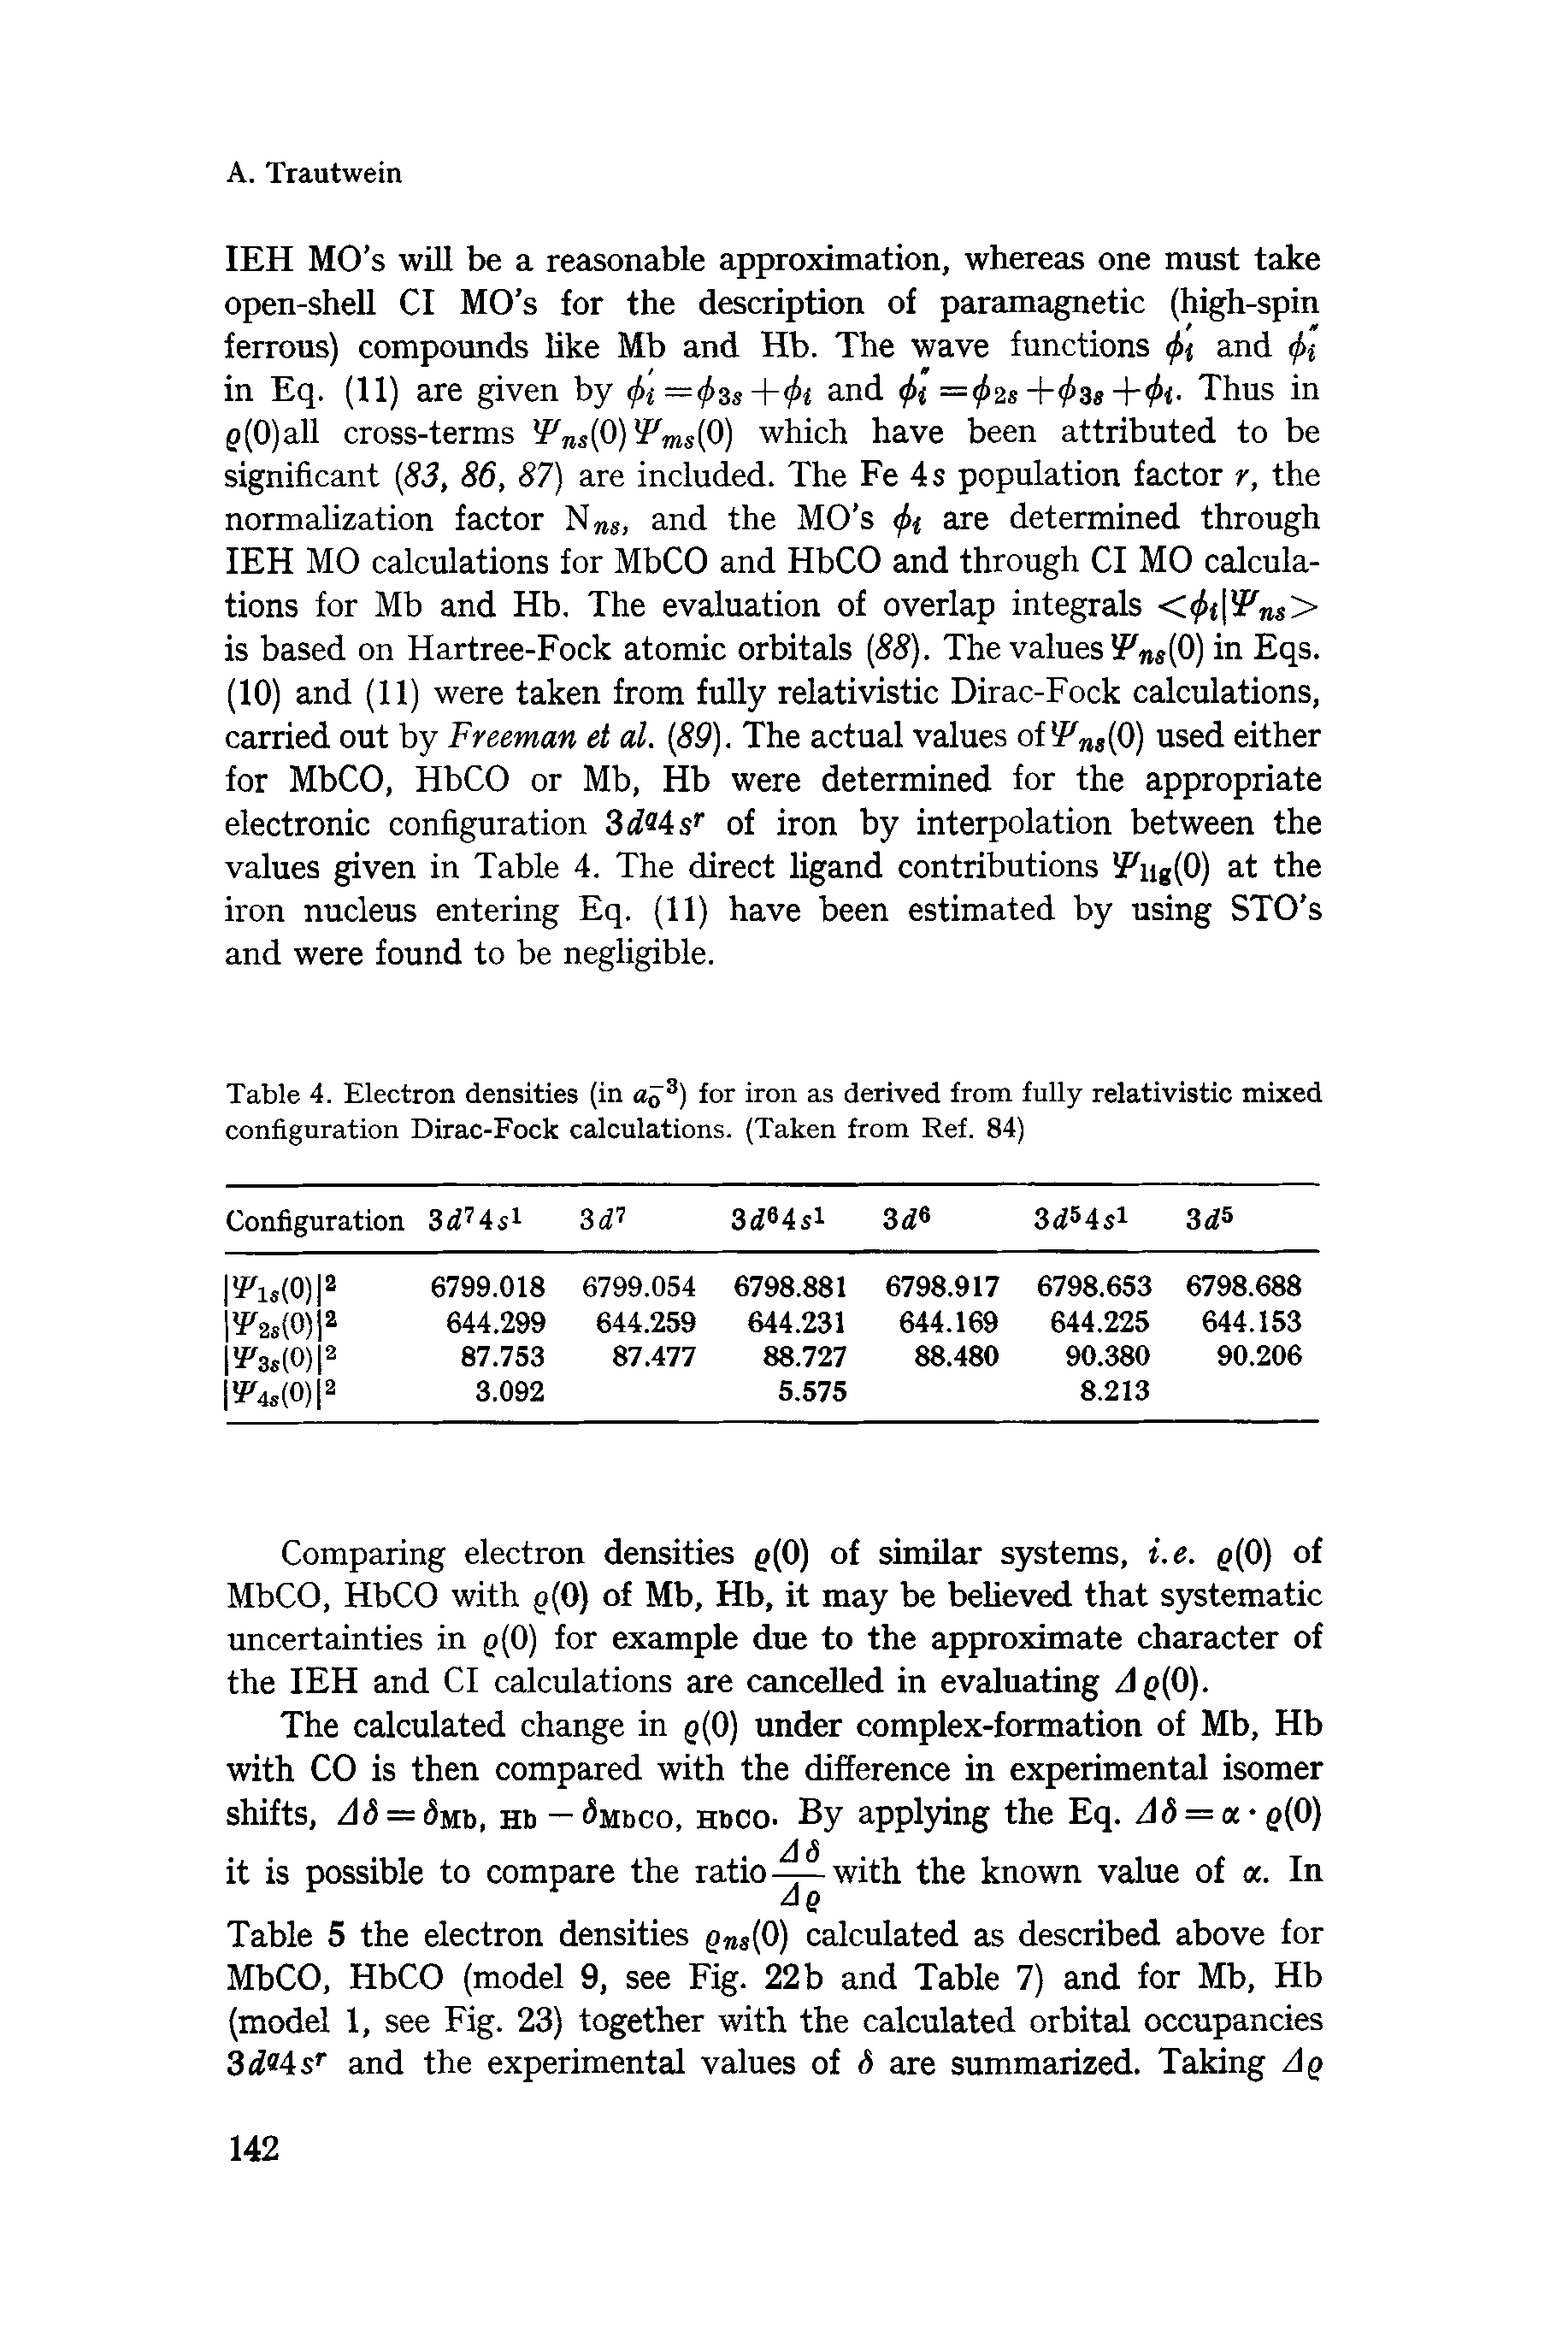 Table 4. Electron densities (in aa 3) for iron as derived from fully relativistic mixed configuration Dirac-Fock calculations. (Taken from Ref. 84)...